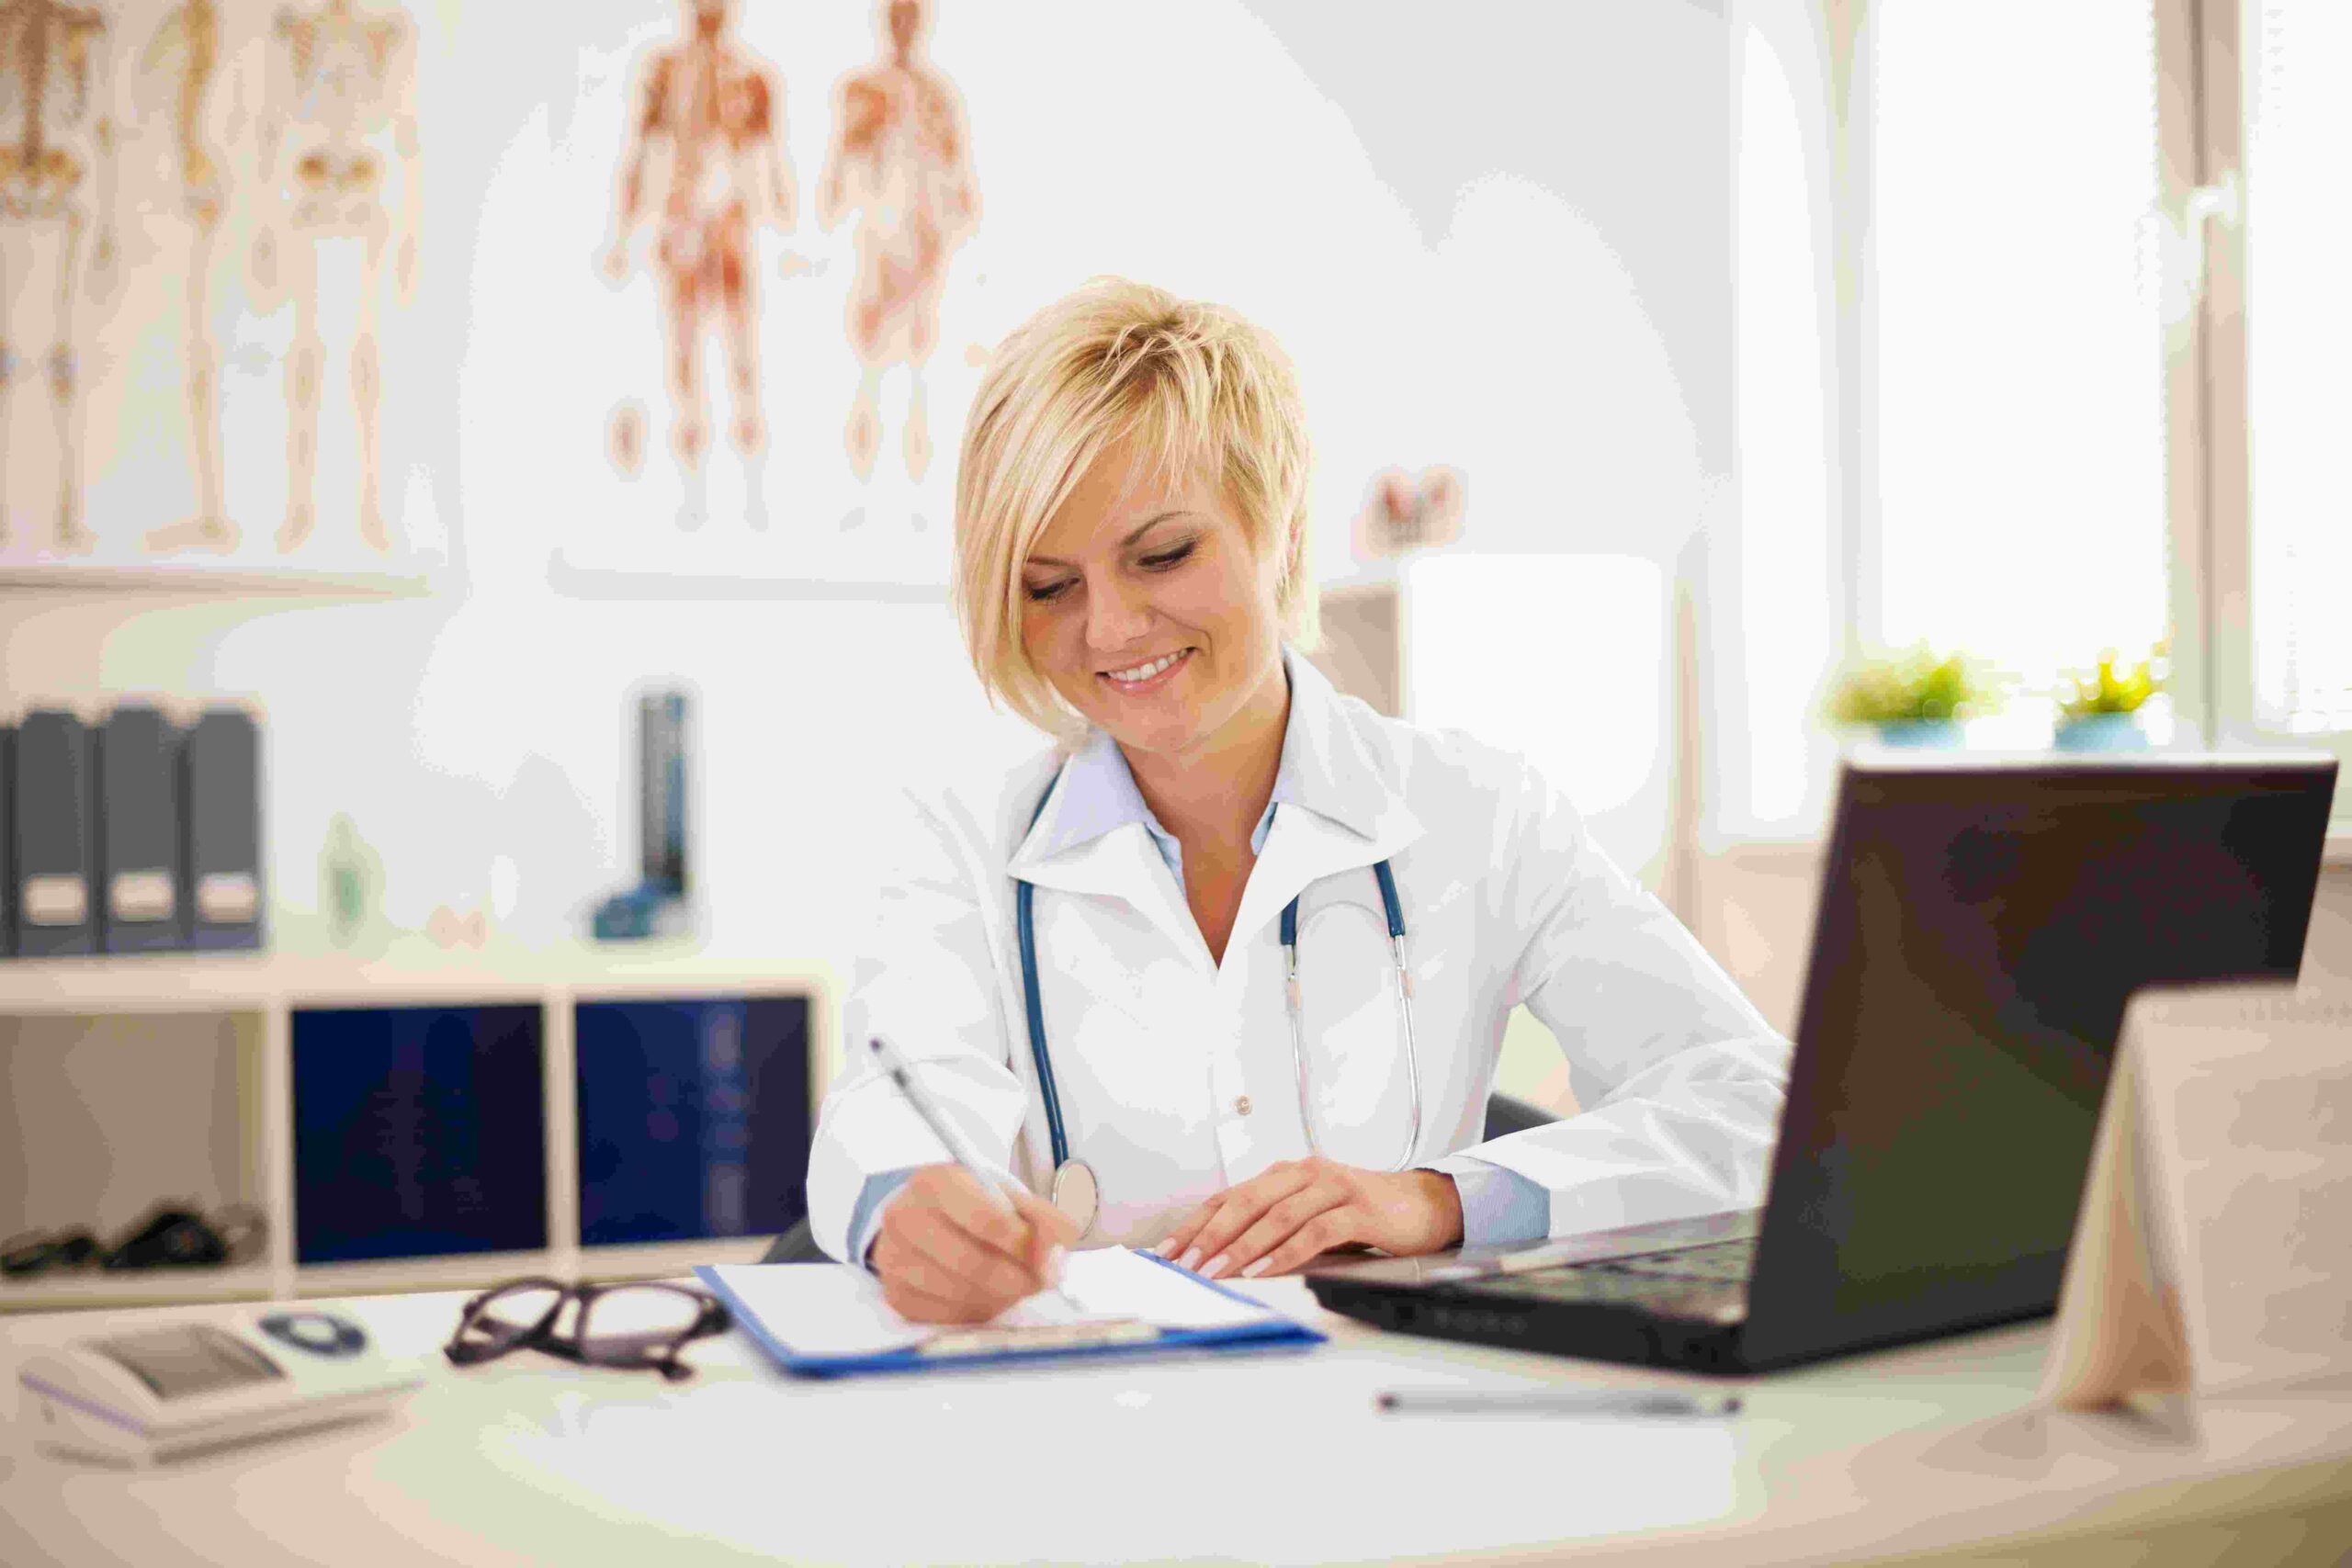 What Can I Expect During a Consultation with a Neurology Medical Biller?